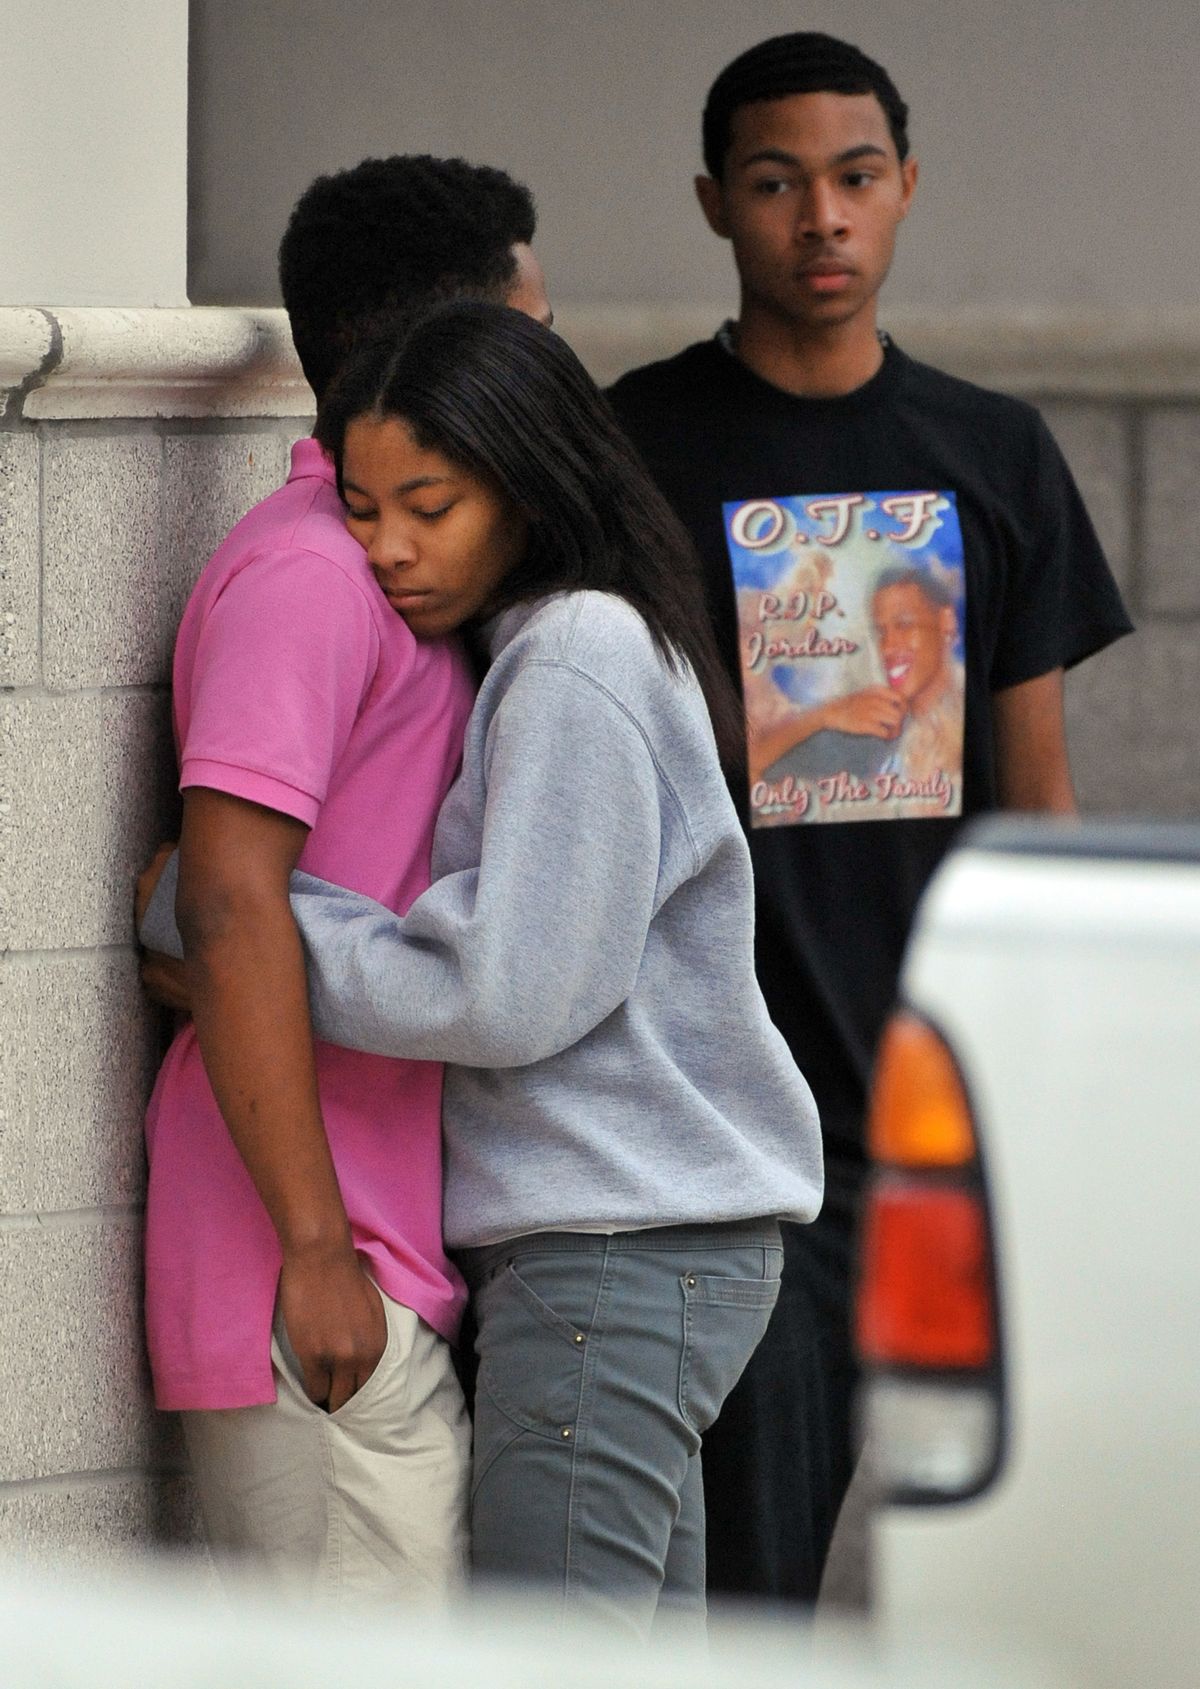 Friends of Jordan Davis comfort each other outside the funeral home where the visitation with Davis